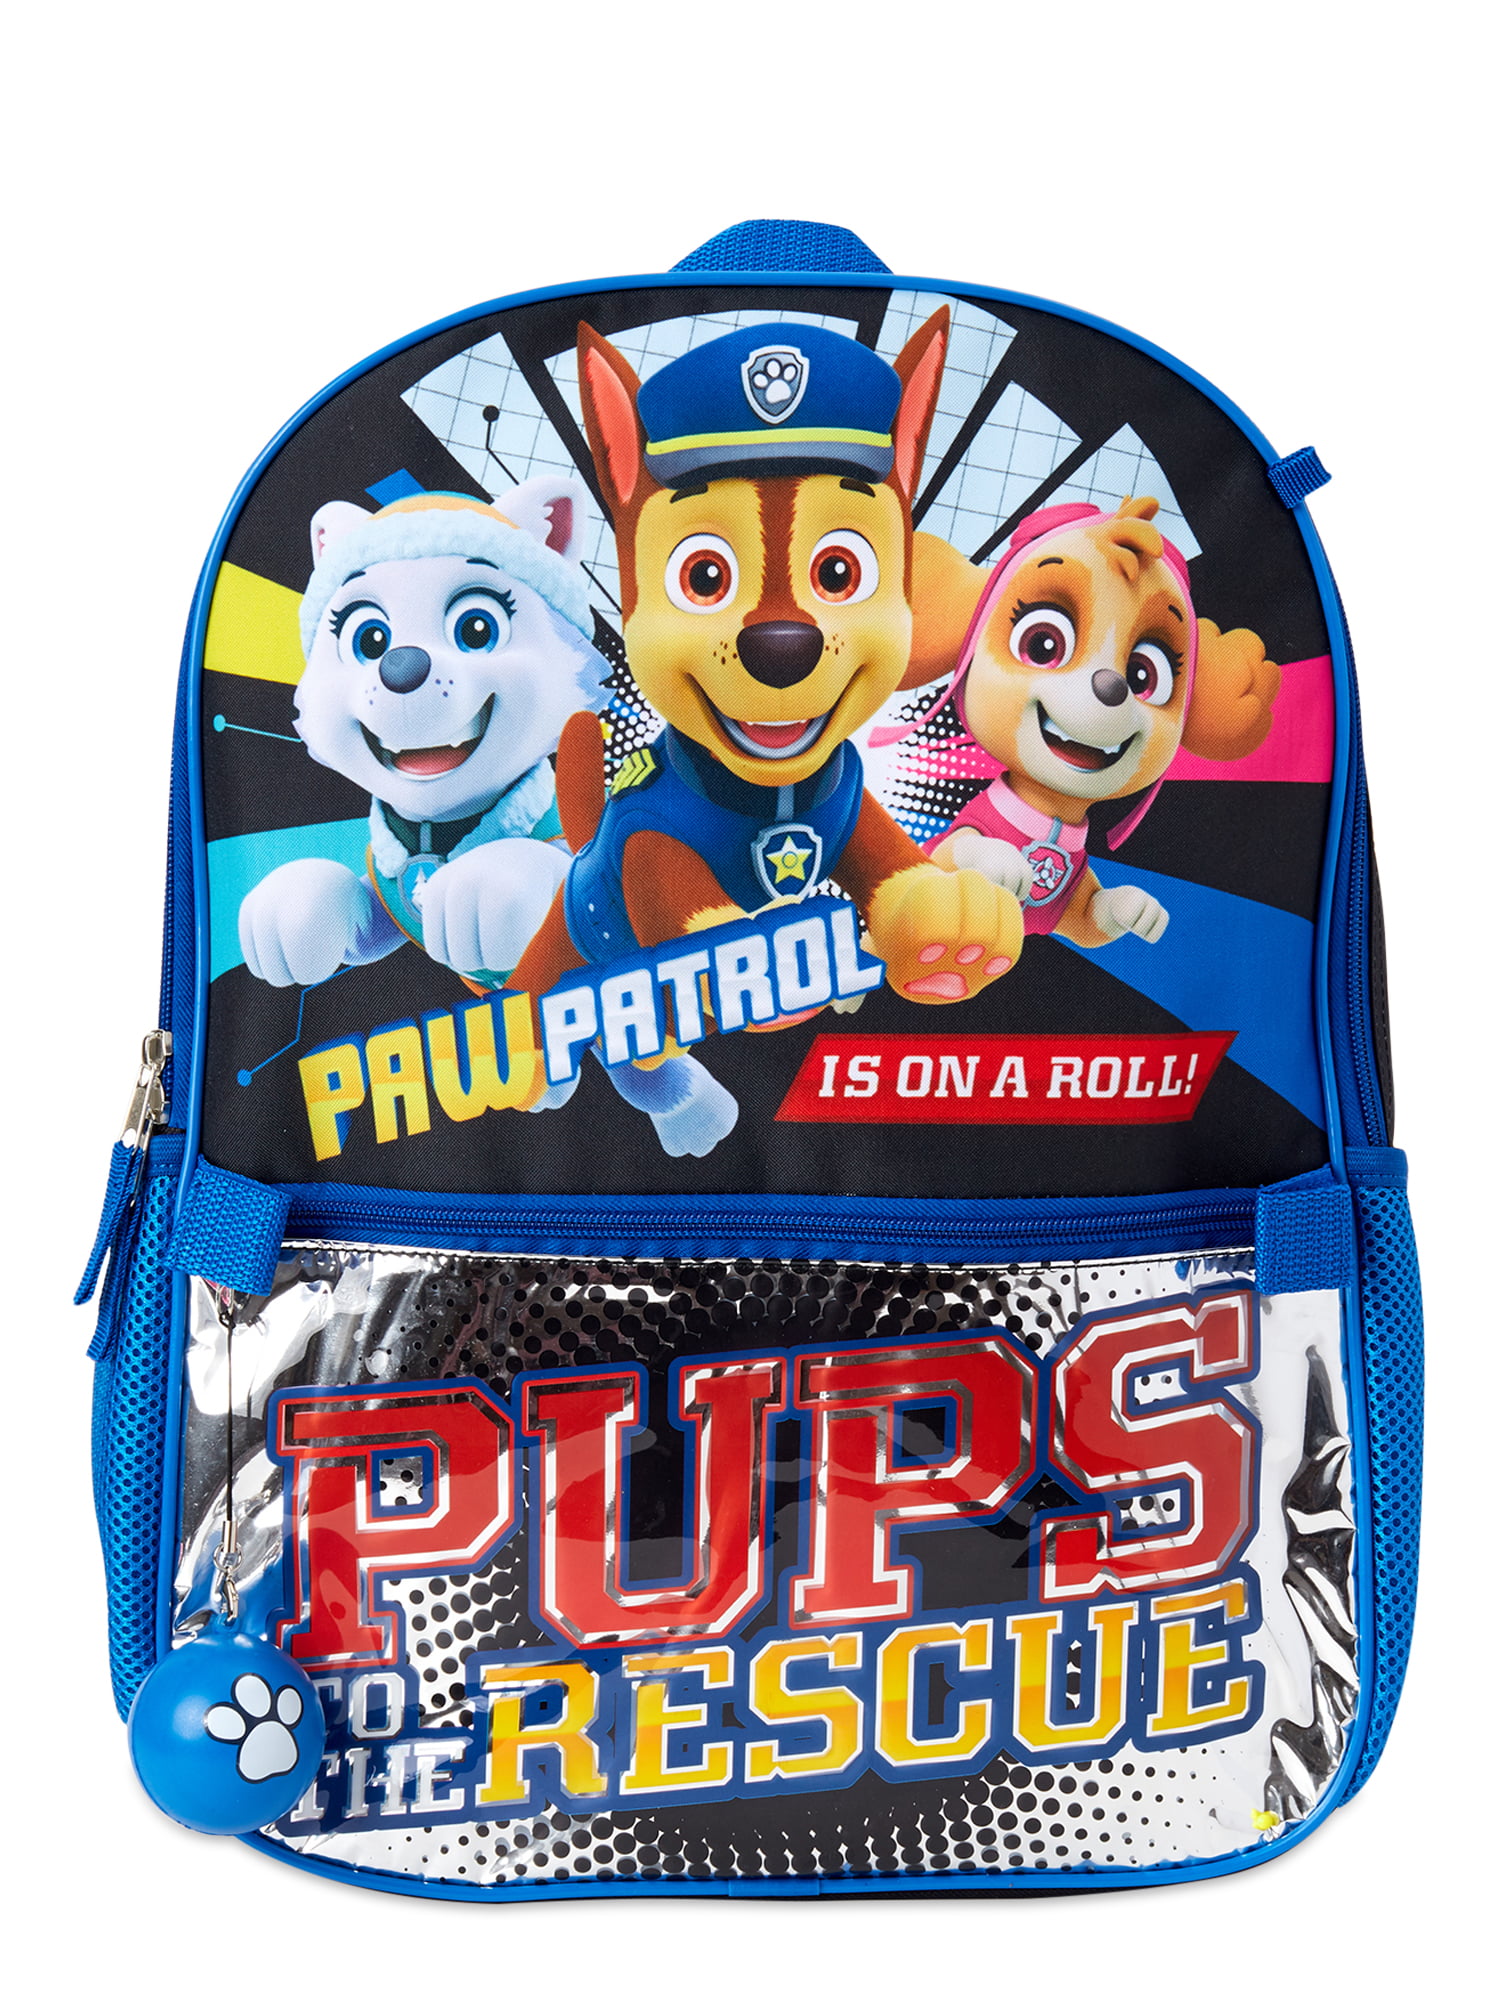 Paw Patrol School Supplies Bundle Paw Patrol Travel Activity Backpack Set ~ Deluxe 8.5 Mini Paw Patrol Activity Clear Backpack with Coloring Pad and More Stickers Posters